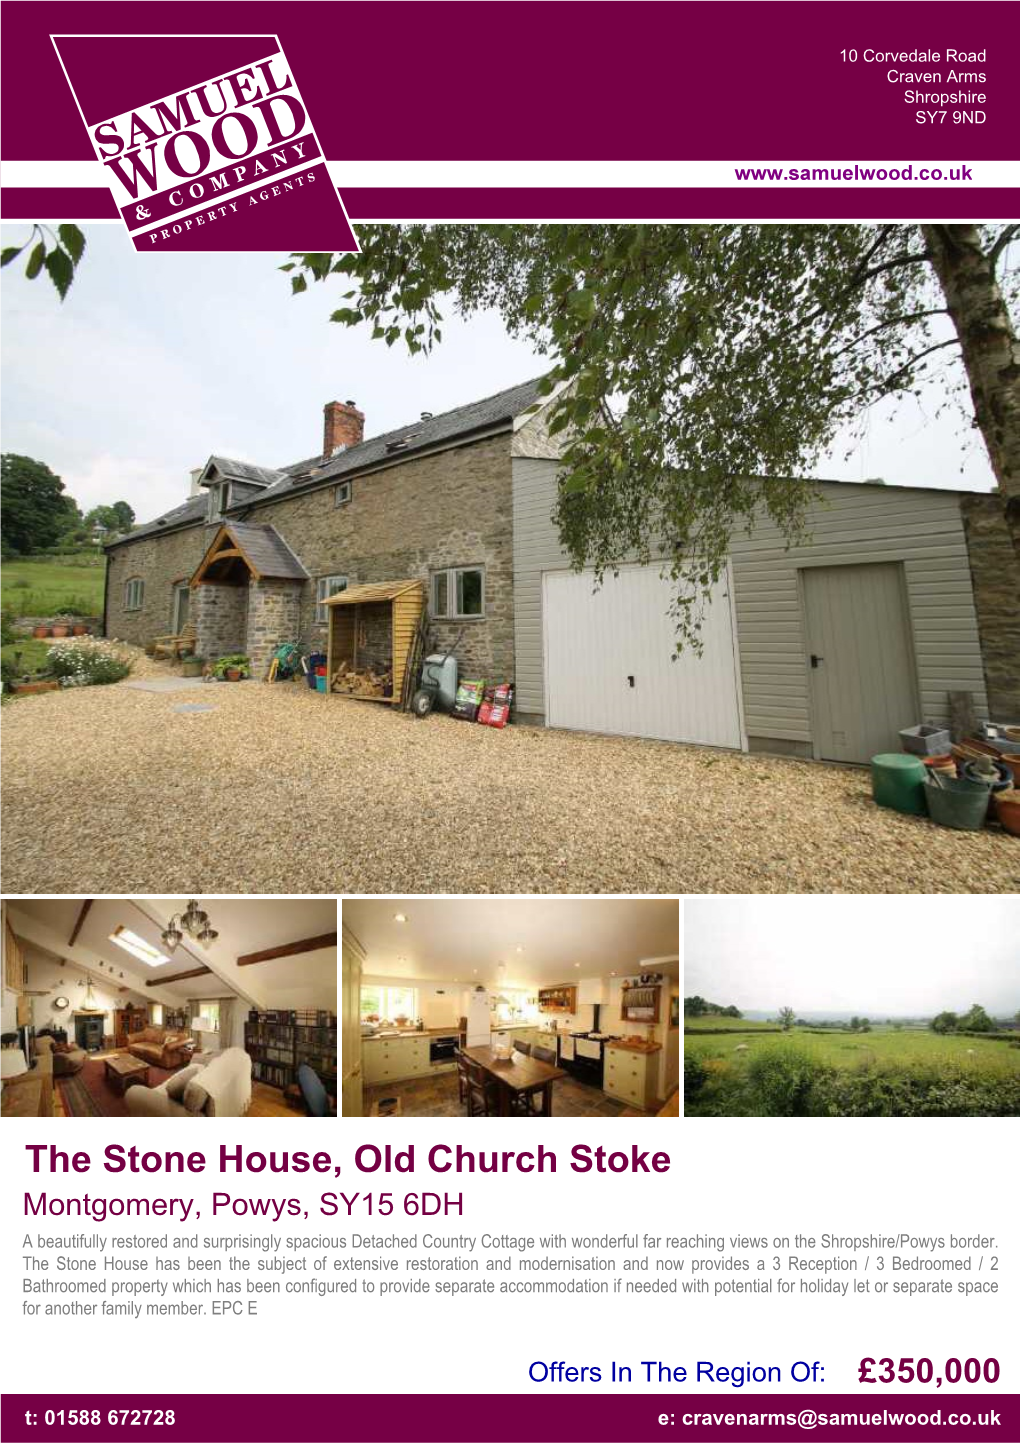 The Stone House, Old Church Stoke